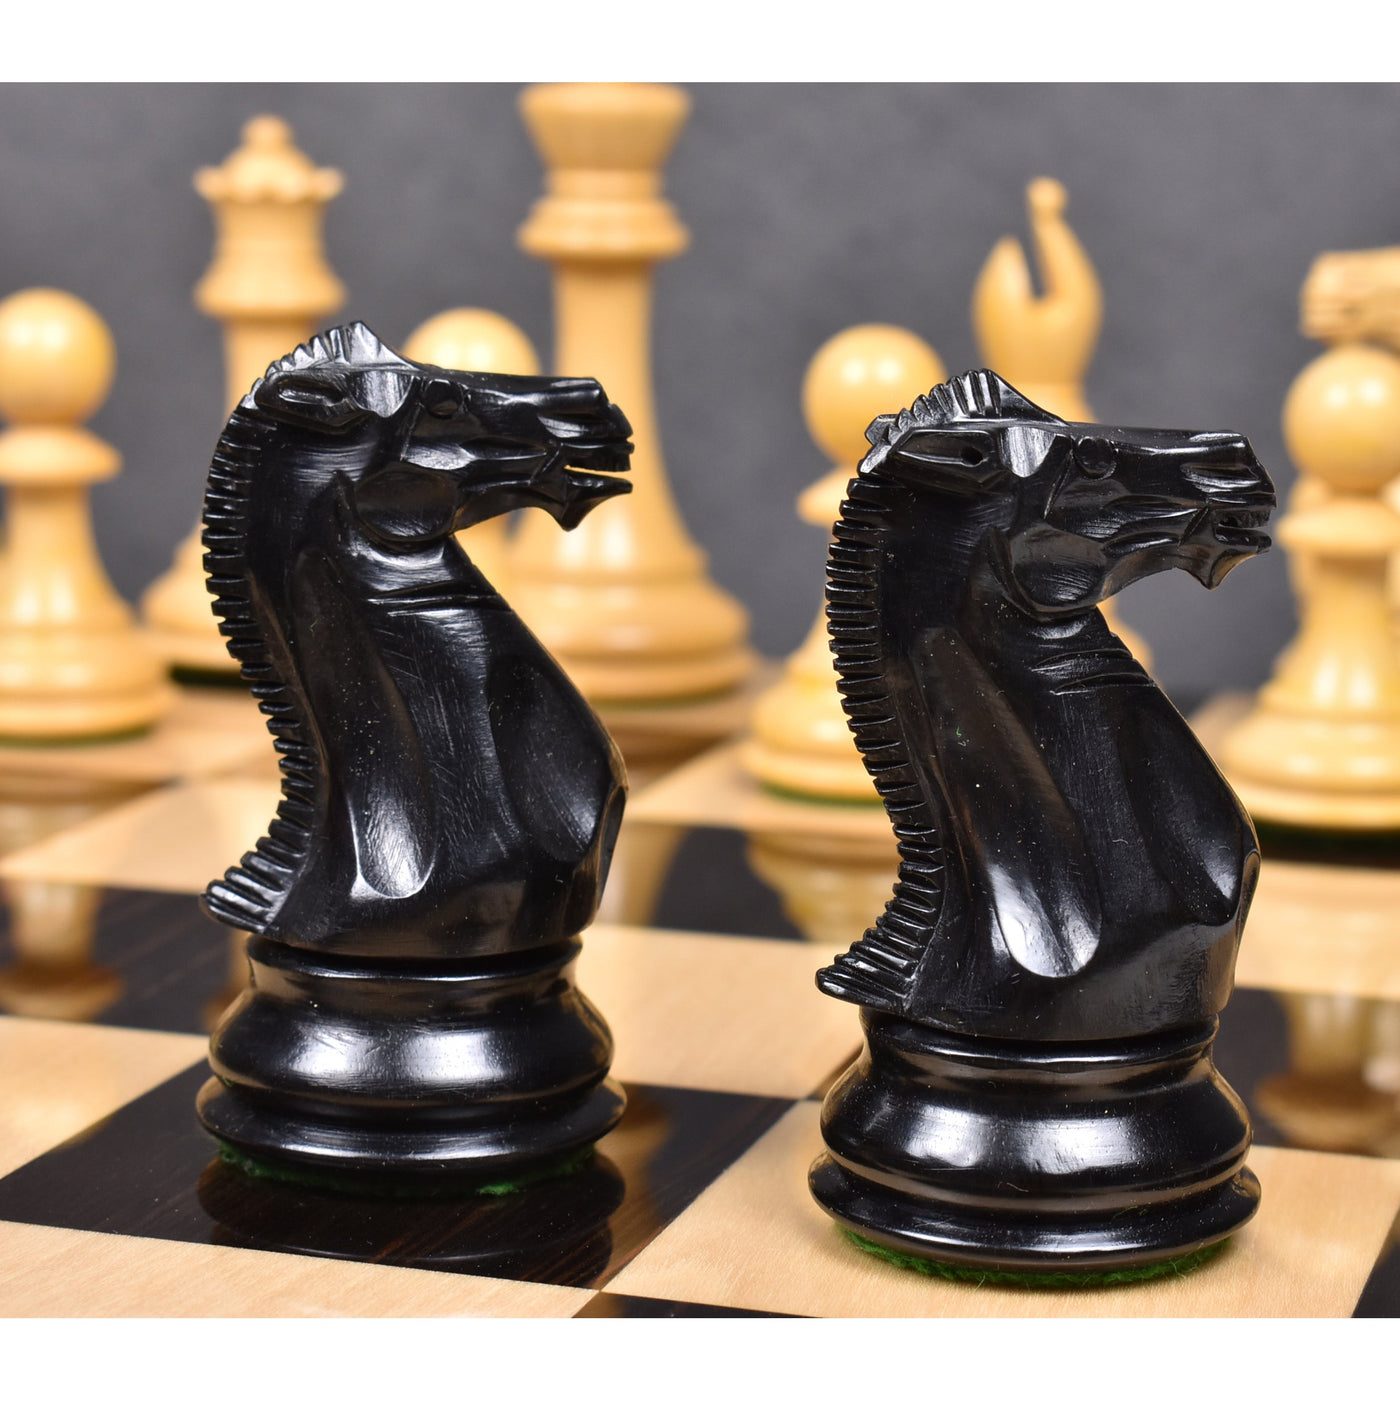 Slightly Imperfect 4" Sleek Staunton Luxury Chess Set - Chess Pieces Only - Triple Weighted Ebony Wood